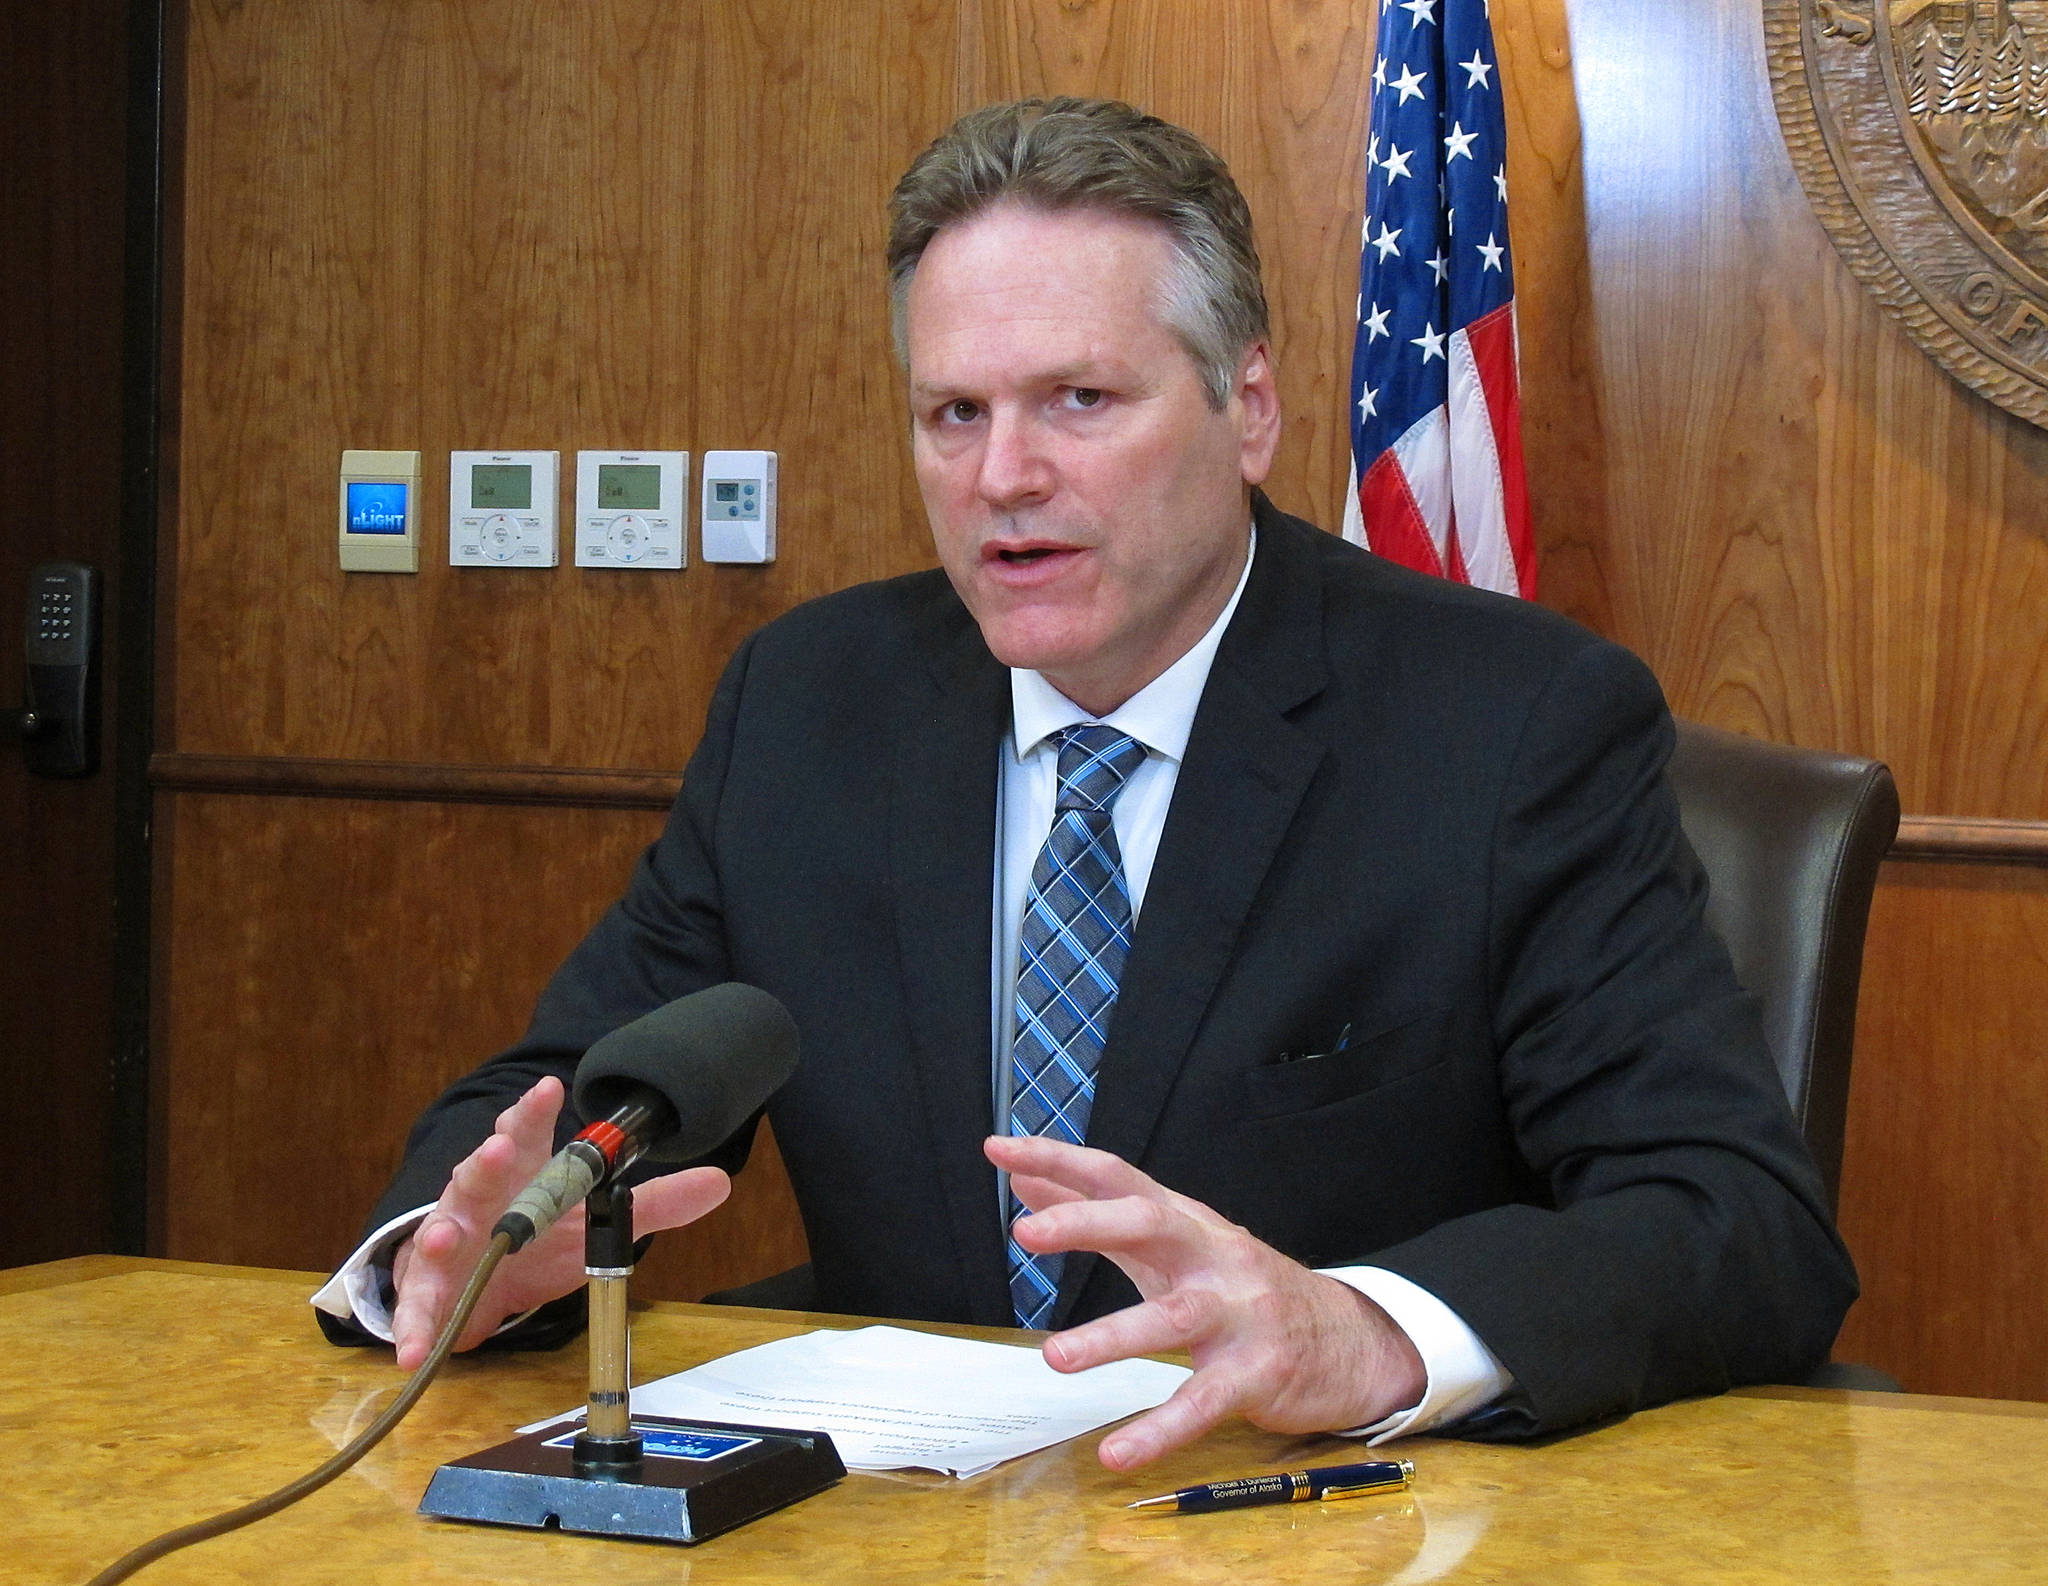 Alaska Gov. Mike Dunleavy speaks to reporters about his expectations for the end of the legislative session on Wednesday, May 15, 2019, Juneau, Alaska. Wednesday marked a constitutional deadline for the end of the regular session. (AP Photo/Becky Bohrer)